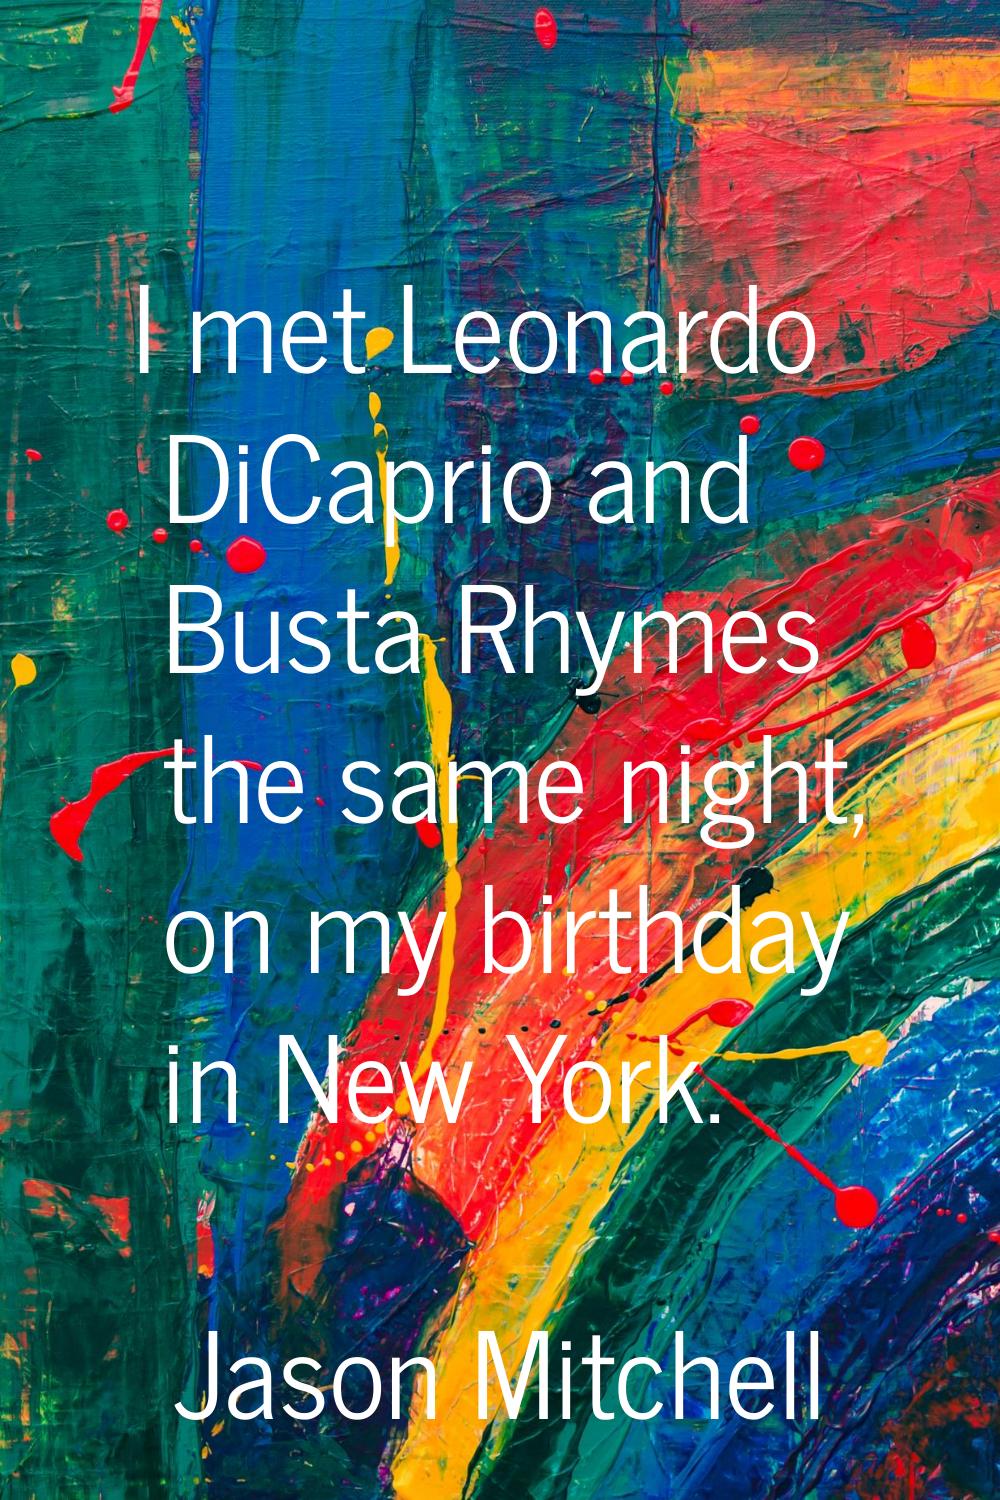 I met Leonardo DiCaprio and Busta Rhymes the same night, on my birthday in New York.